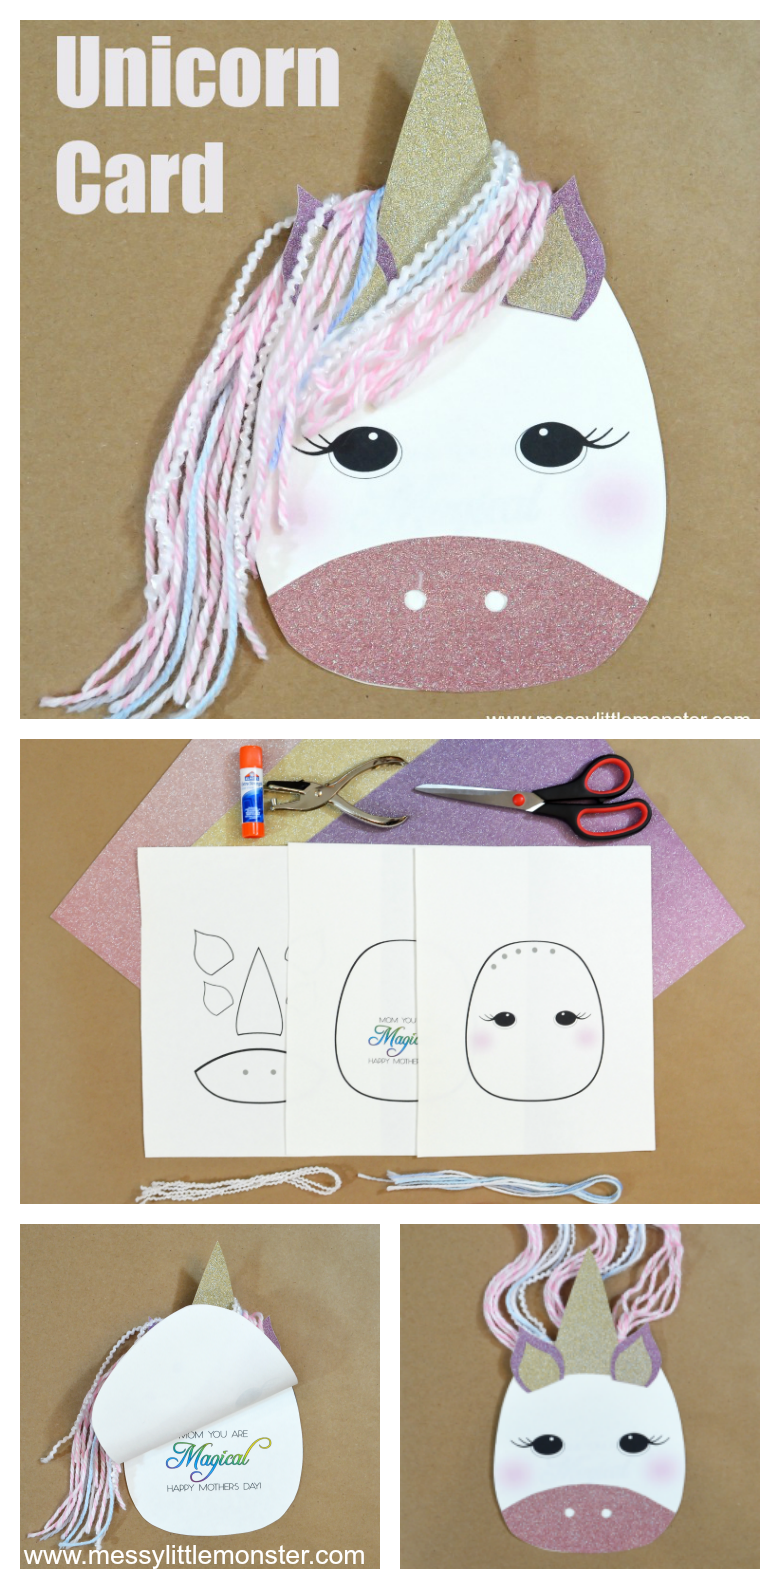 Unicorn crafts for kids are the best! Here is an easy diy unicorn mothers day card for kids to make using our free printbale unicorn template.